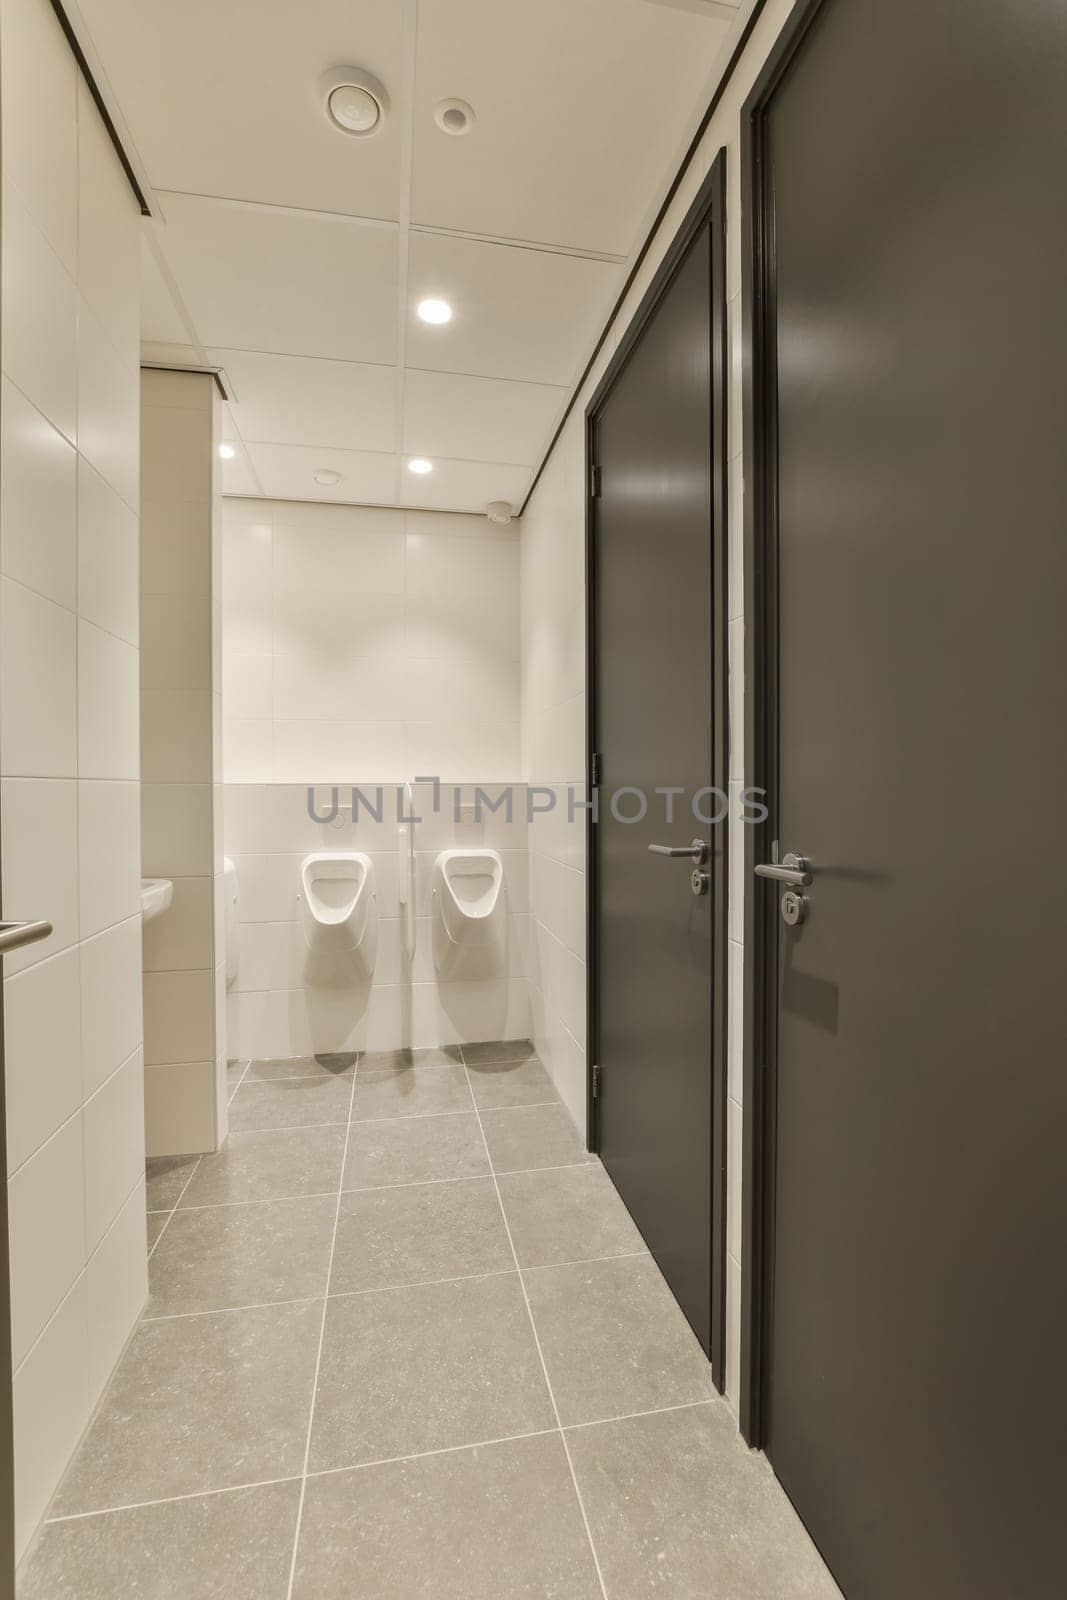 a bathroom with two toilets in the middle and one on the other side there is an open door that leads to another room